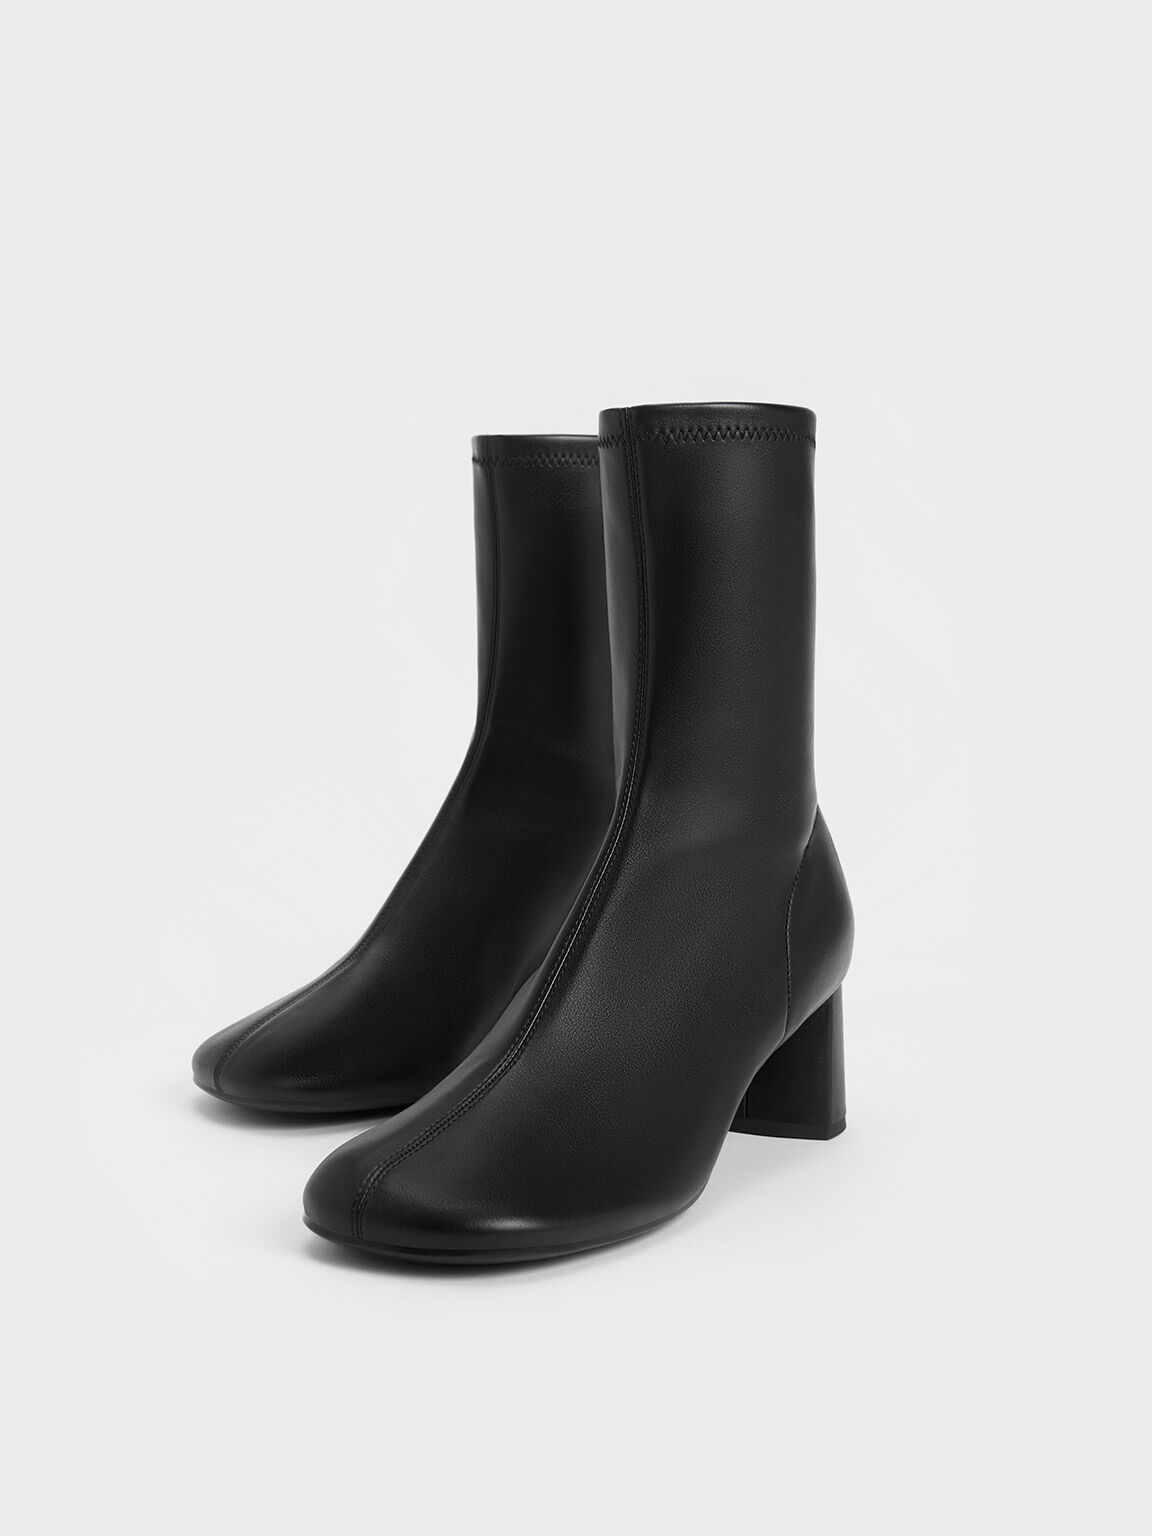 Round-Toe Zip-Up Ankle Boots, Black, hi-res